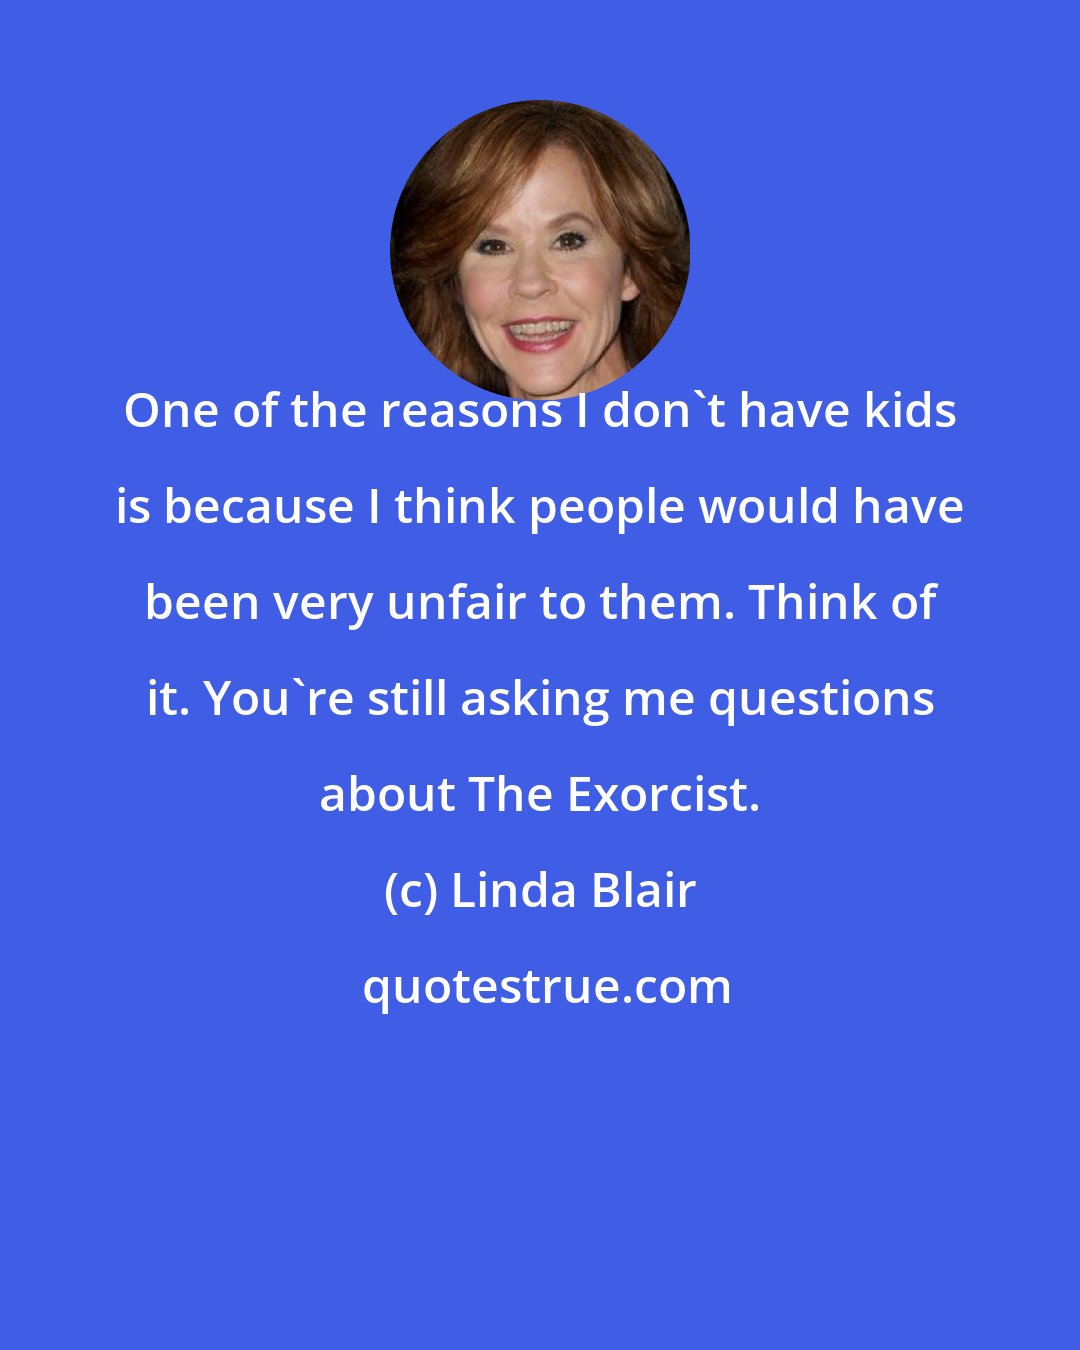 Linda Blair: One of the reasons I don't have kids is because I think people would have been very unfair to them. Think of it. You're still asking me questions about The Exorcist.